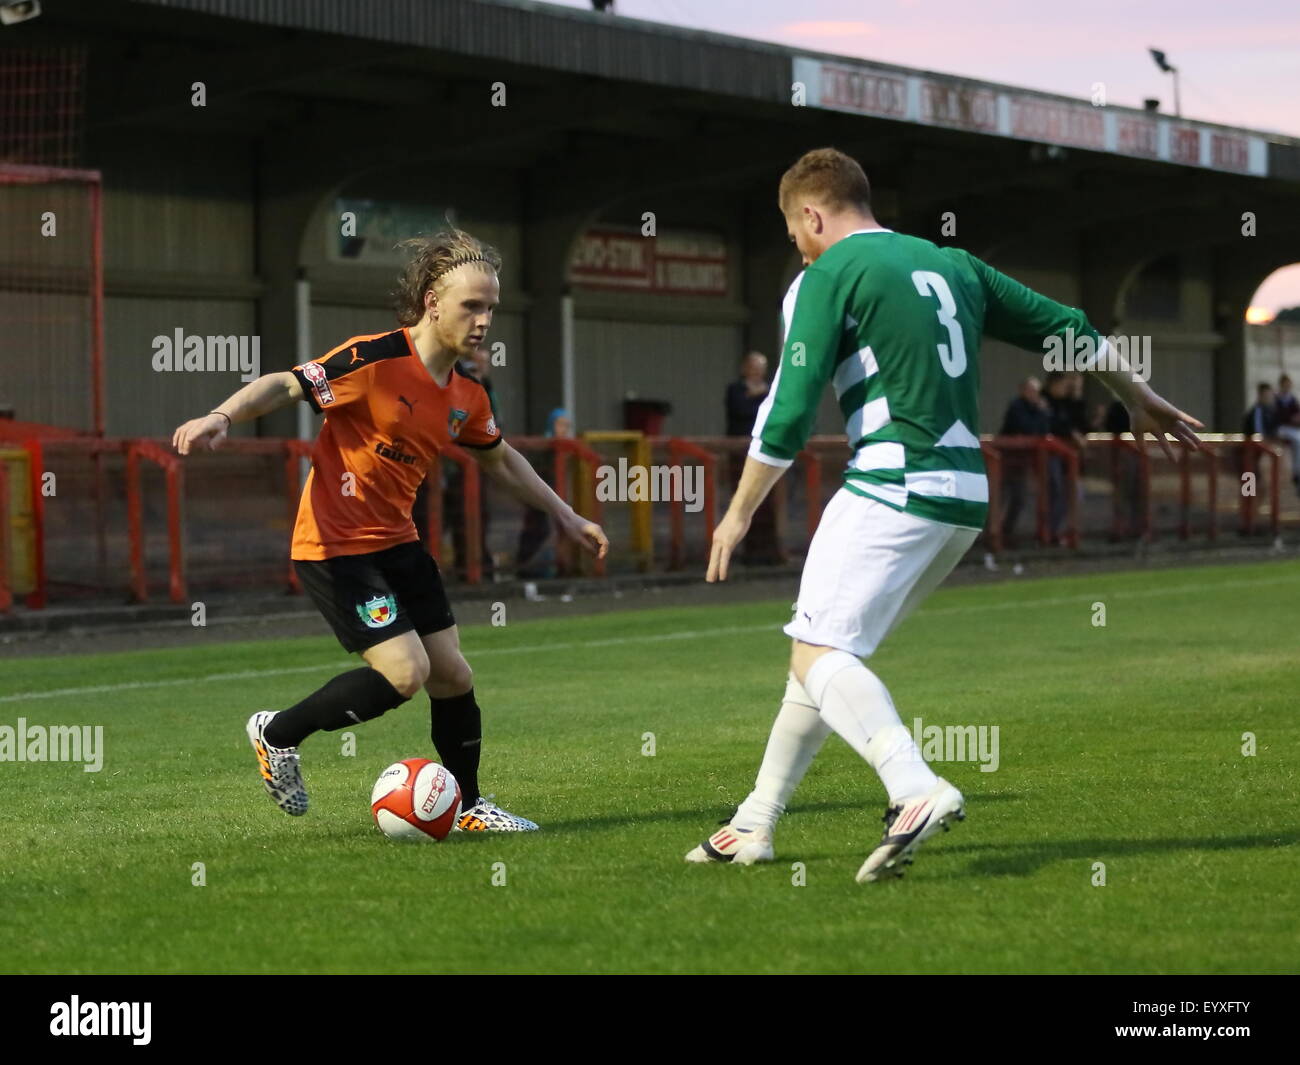 Northwich, Cheshire, UK. 4th August, 2015. Northwich Victoria beat Nantwich Town 2-0 in a pre season friendly held at Witton Albion's Wincham Park in Northwich. Nantwich Town's Matty Kosylo tries to break into the box against Northwich defender Anthony Smart Credit:  Simon Newbury/Alamy Live News Stock Photo